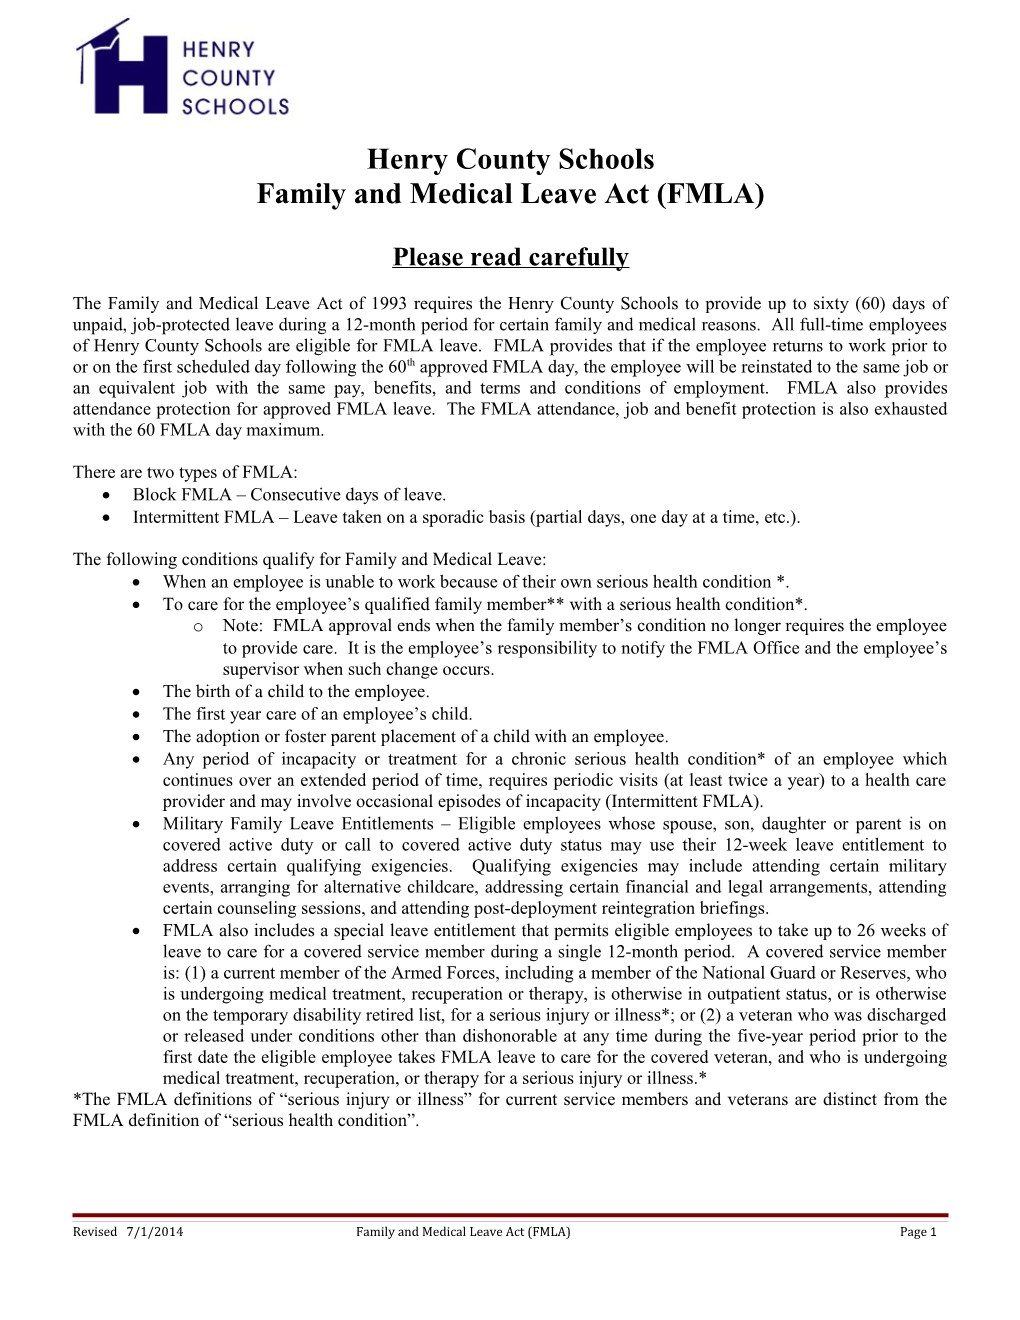 Family and Medical Leave Act (FMLA)